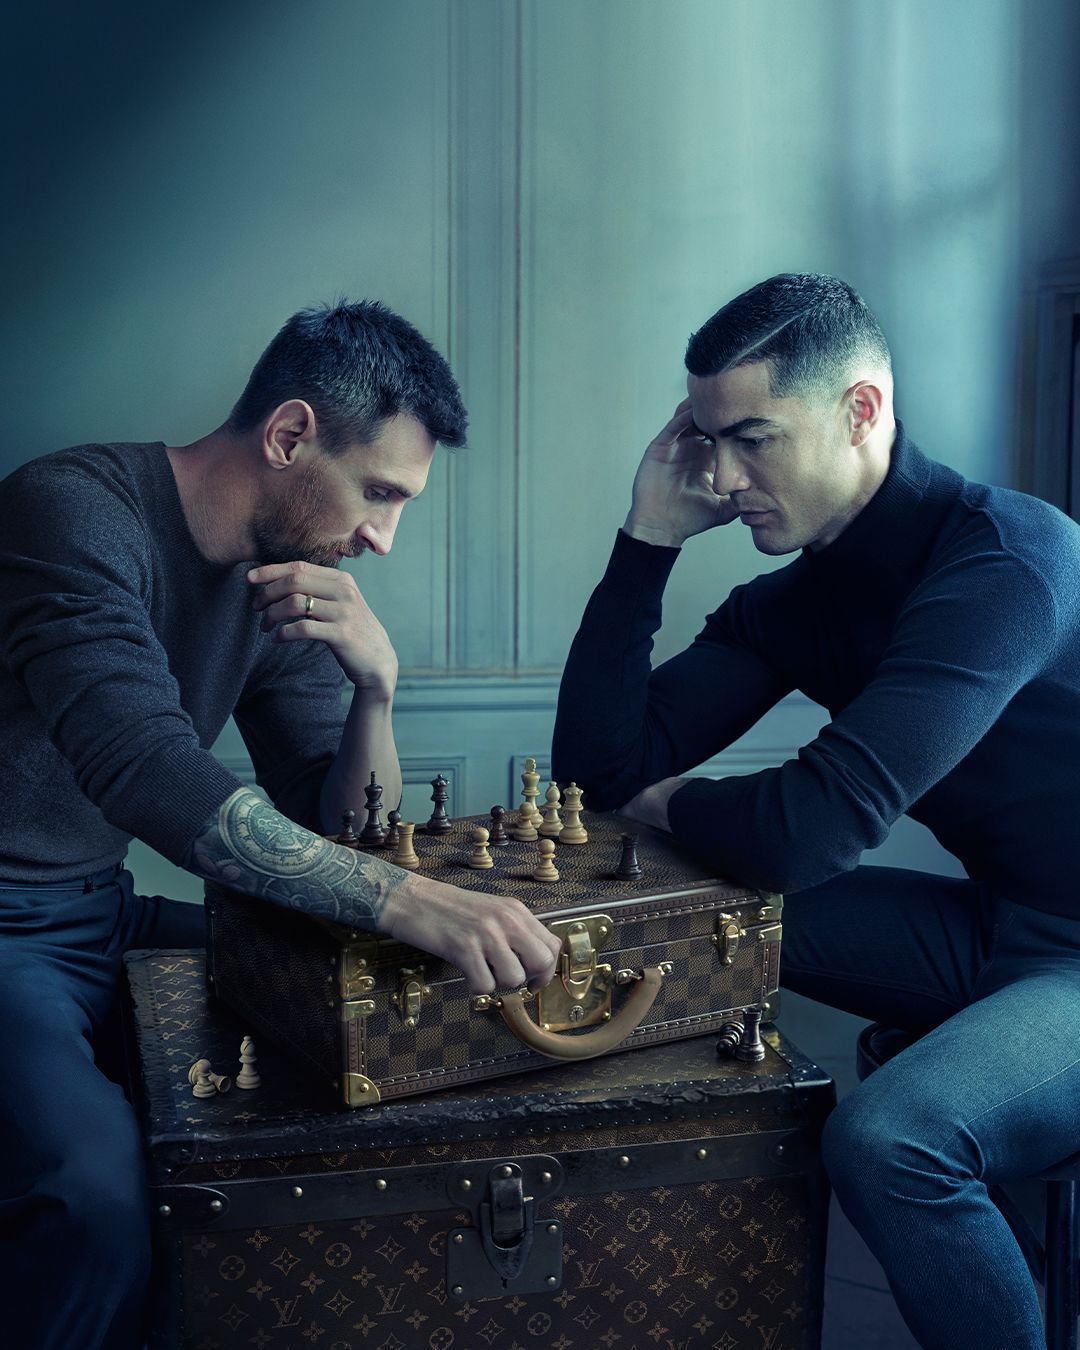 Louis Vuitton brings Cristiano Ronaldo and Lionel Messi together